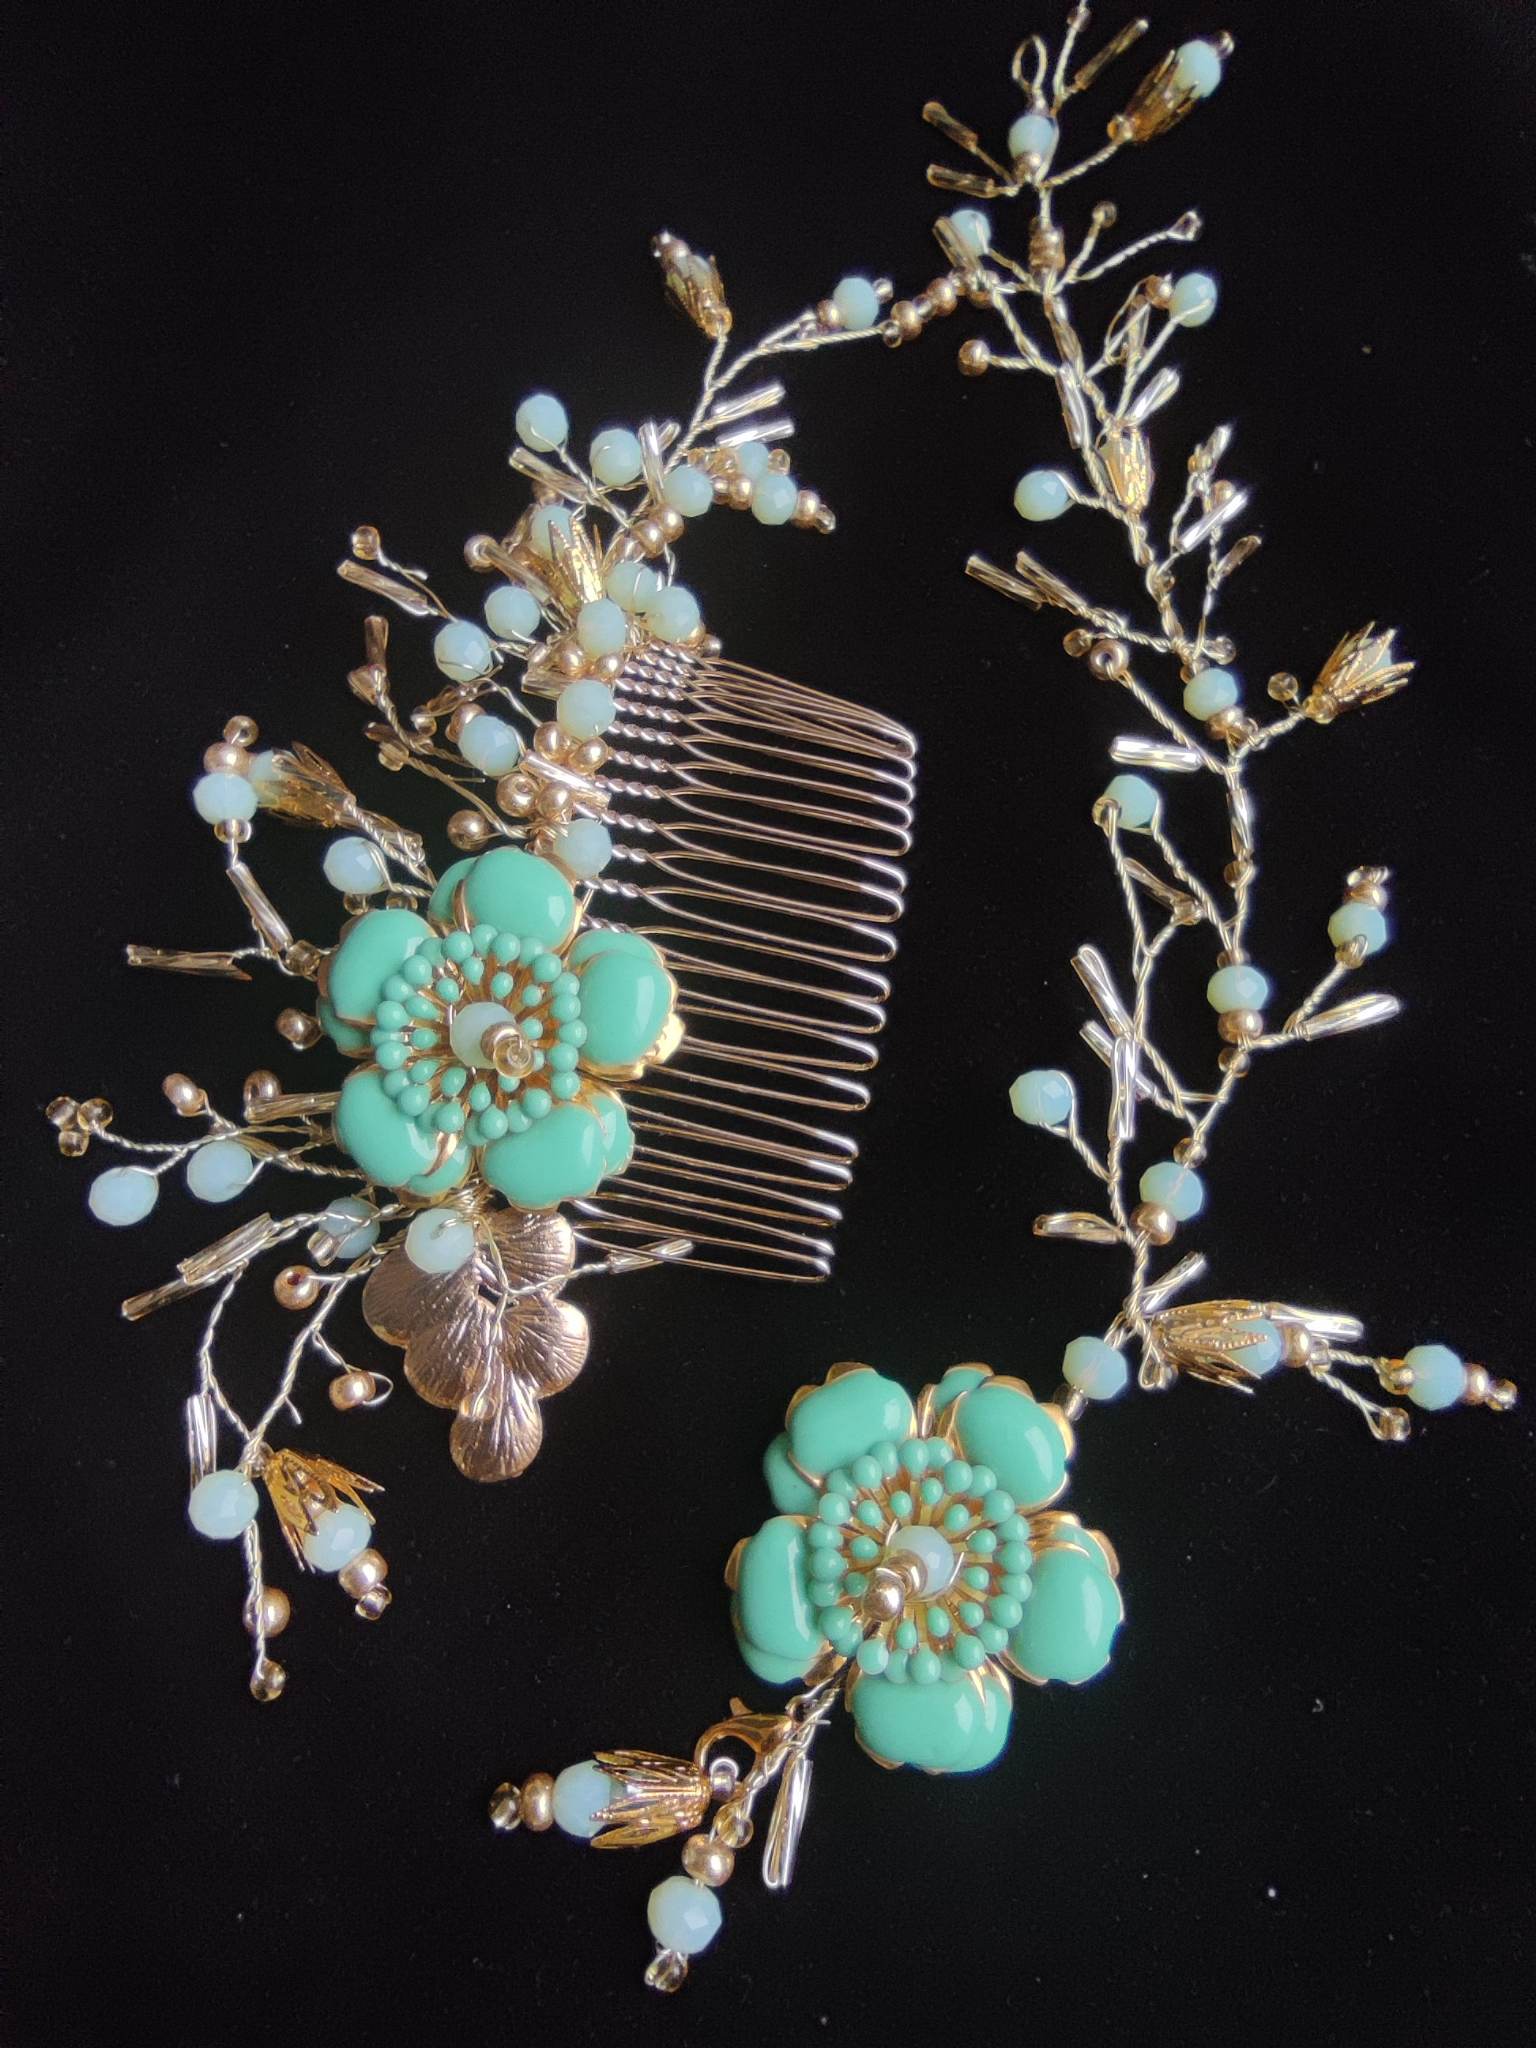 Beautiful Designer Hair Comb in Light Green and Gold Colors with Swarovski Crystals and Enameled Flower - Light Green Luxury